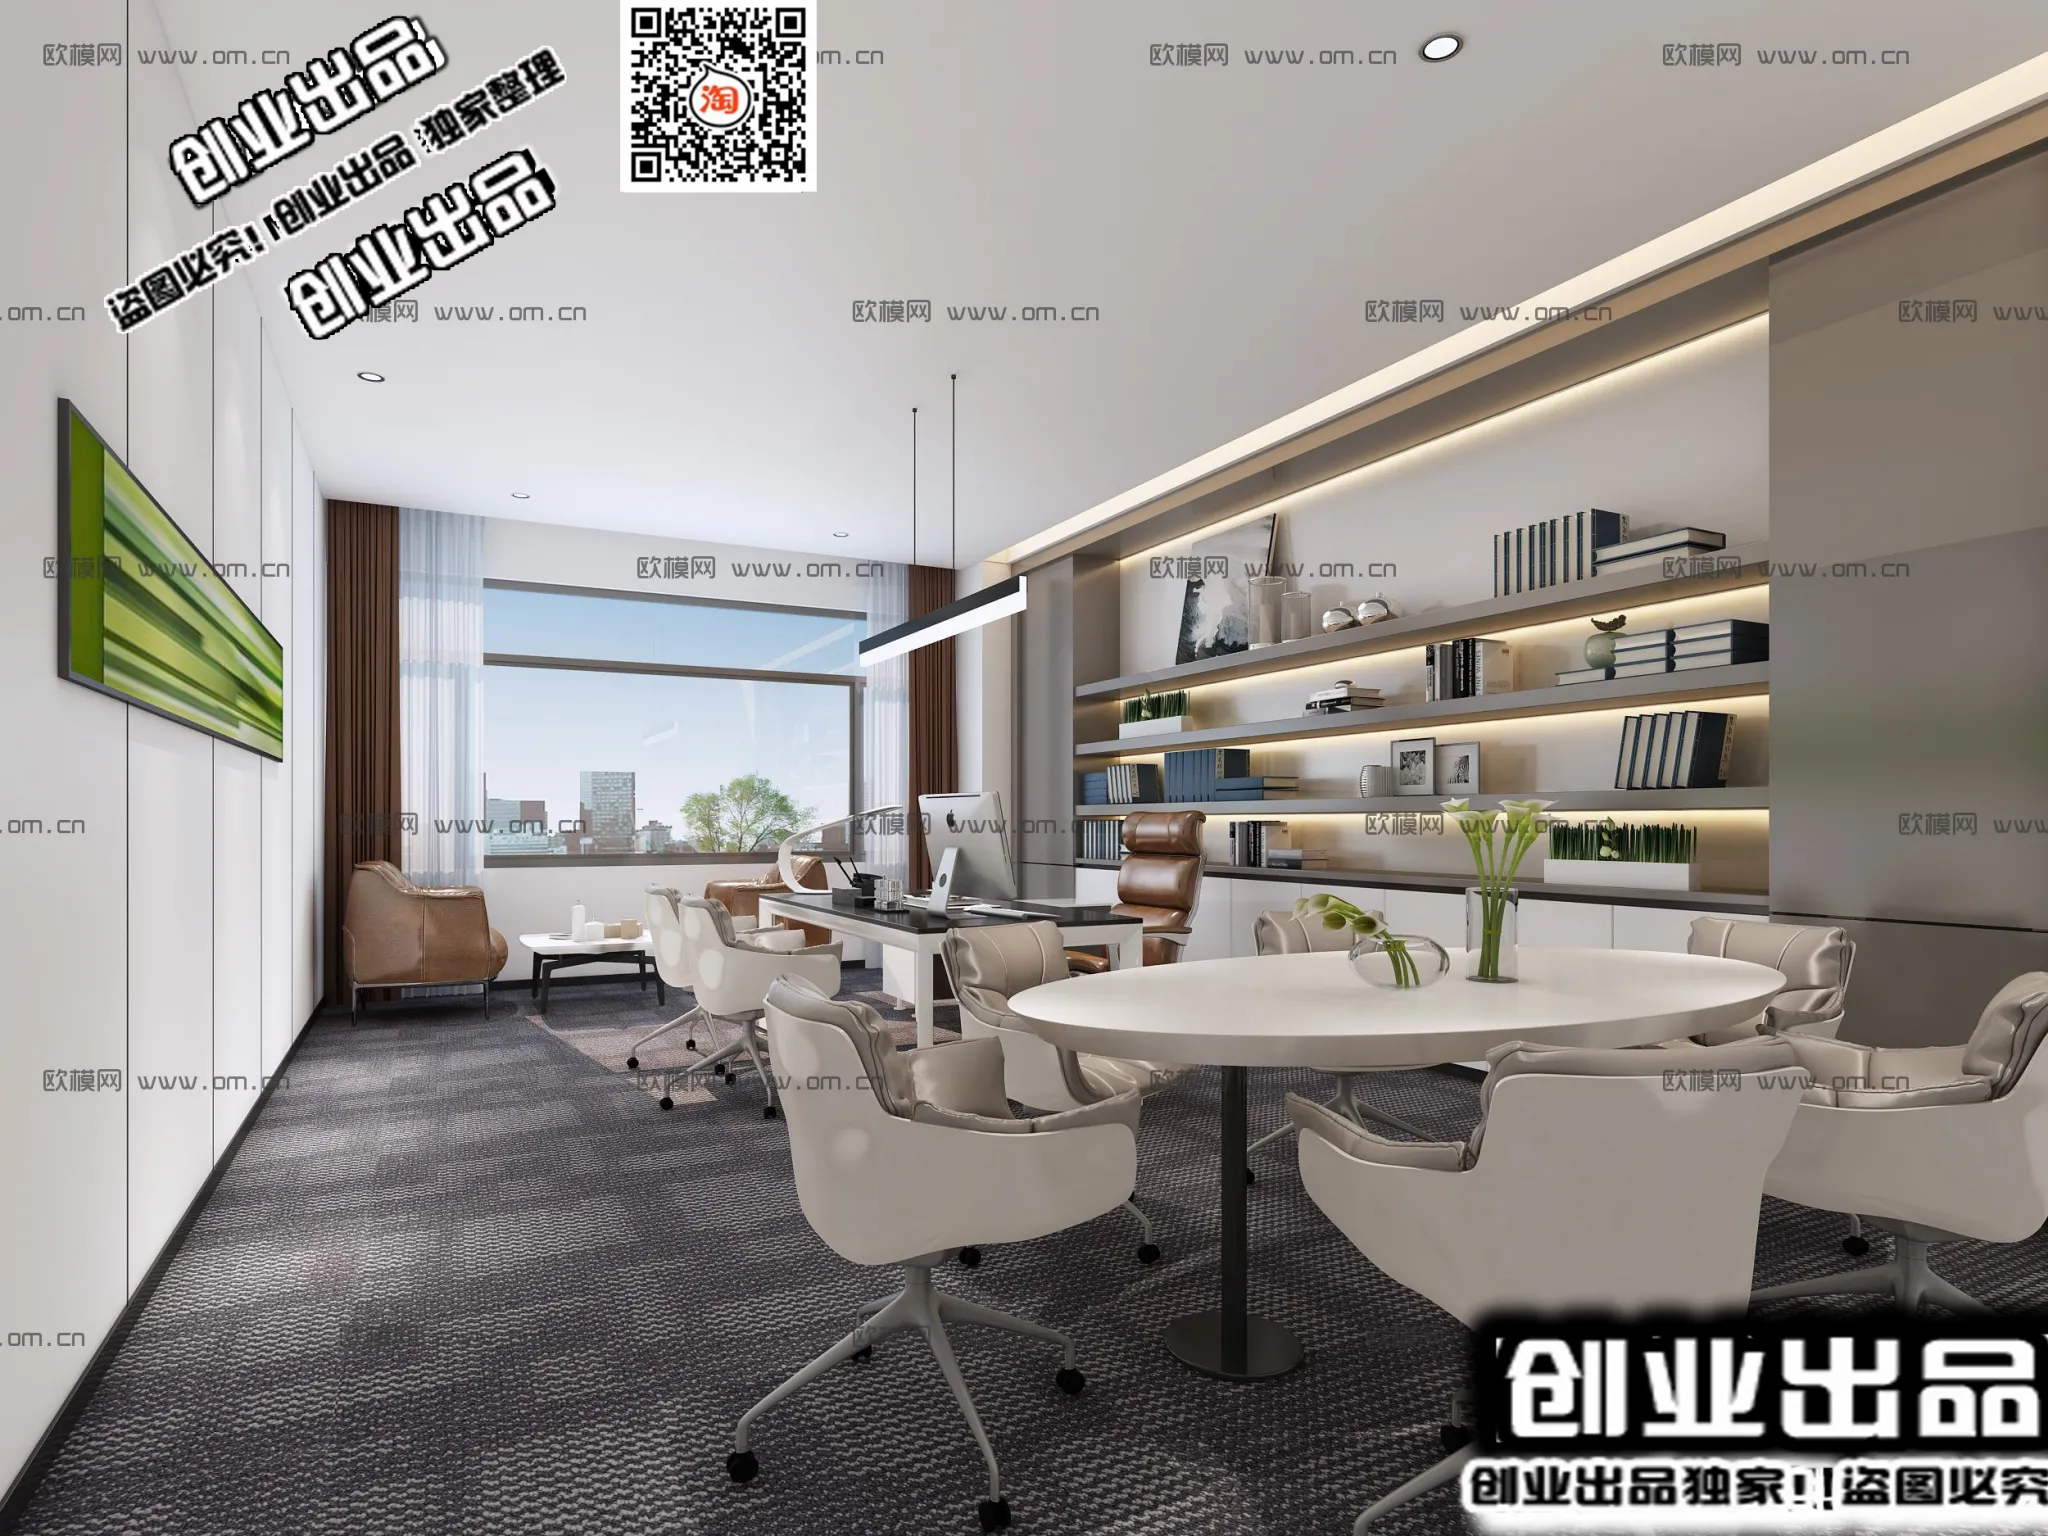 3D OFFICE INTERIOR (VRAY) – MANAGER ROOM 3D SCENES – 045